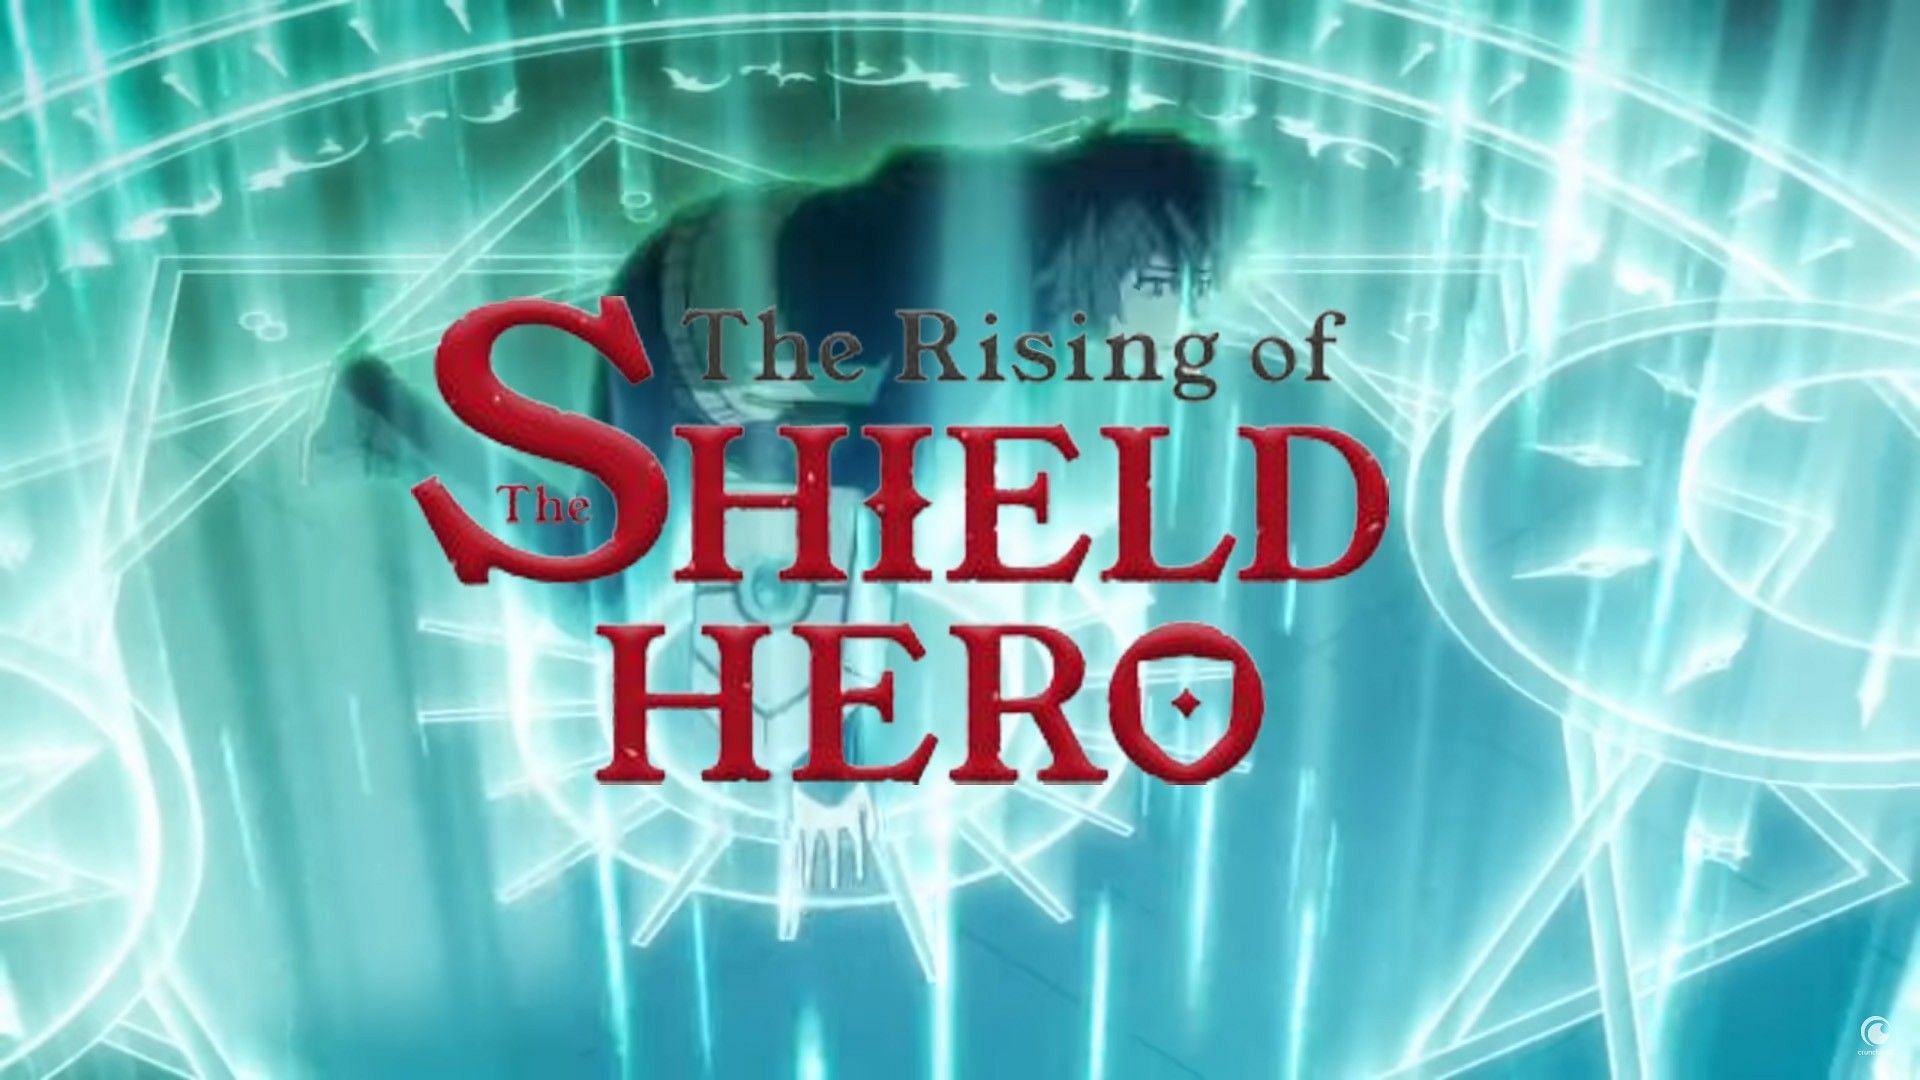 The critically acclaimed series returns with Rising of the Shield Hero season 2 episode 1 (Image via Kinema Citrus)